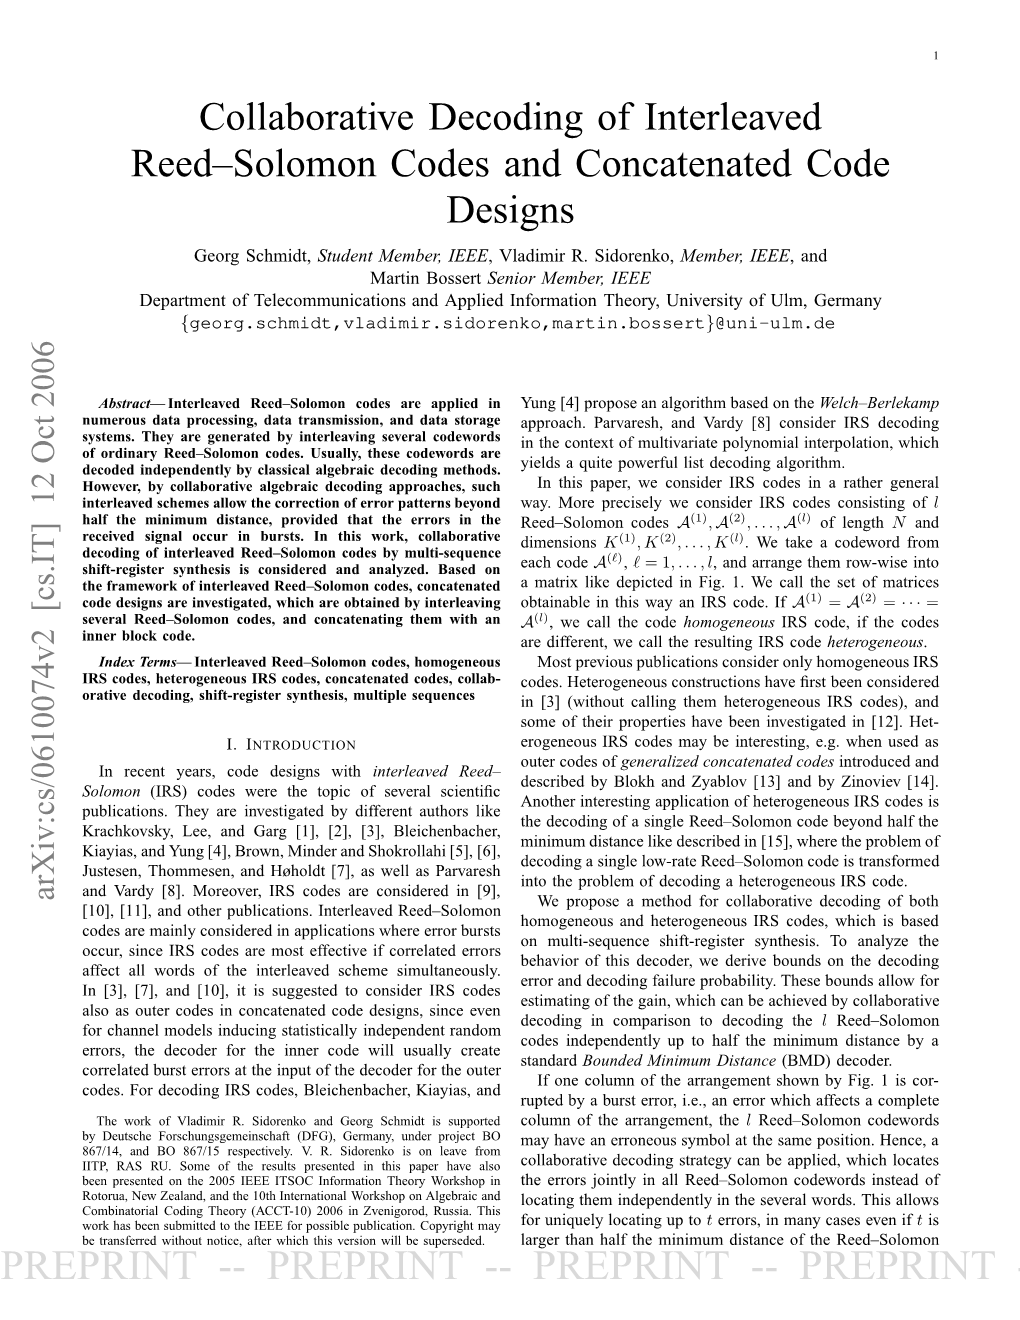 Collaborative Decoding of Interleaved Reed–Solomon Codes And